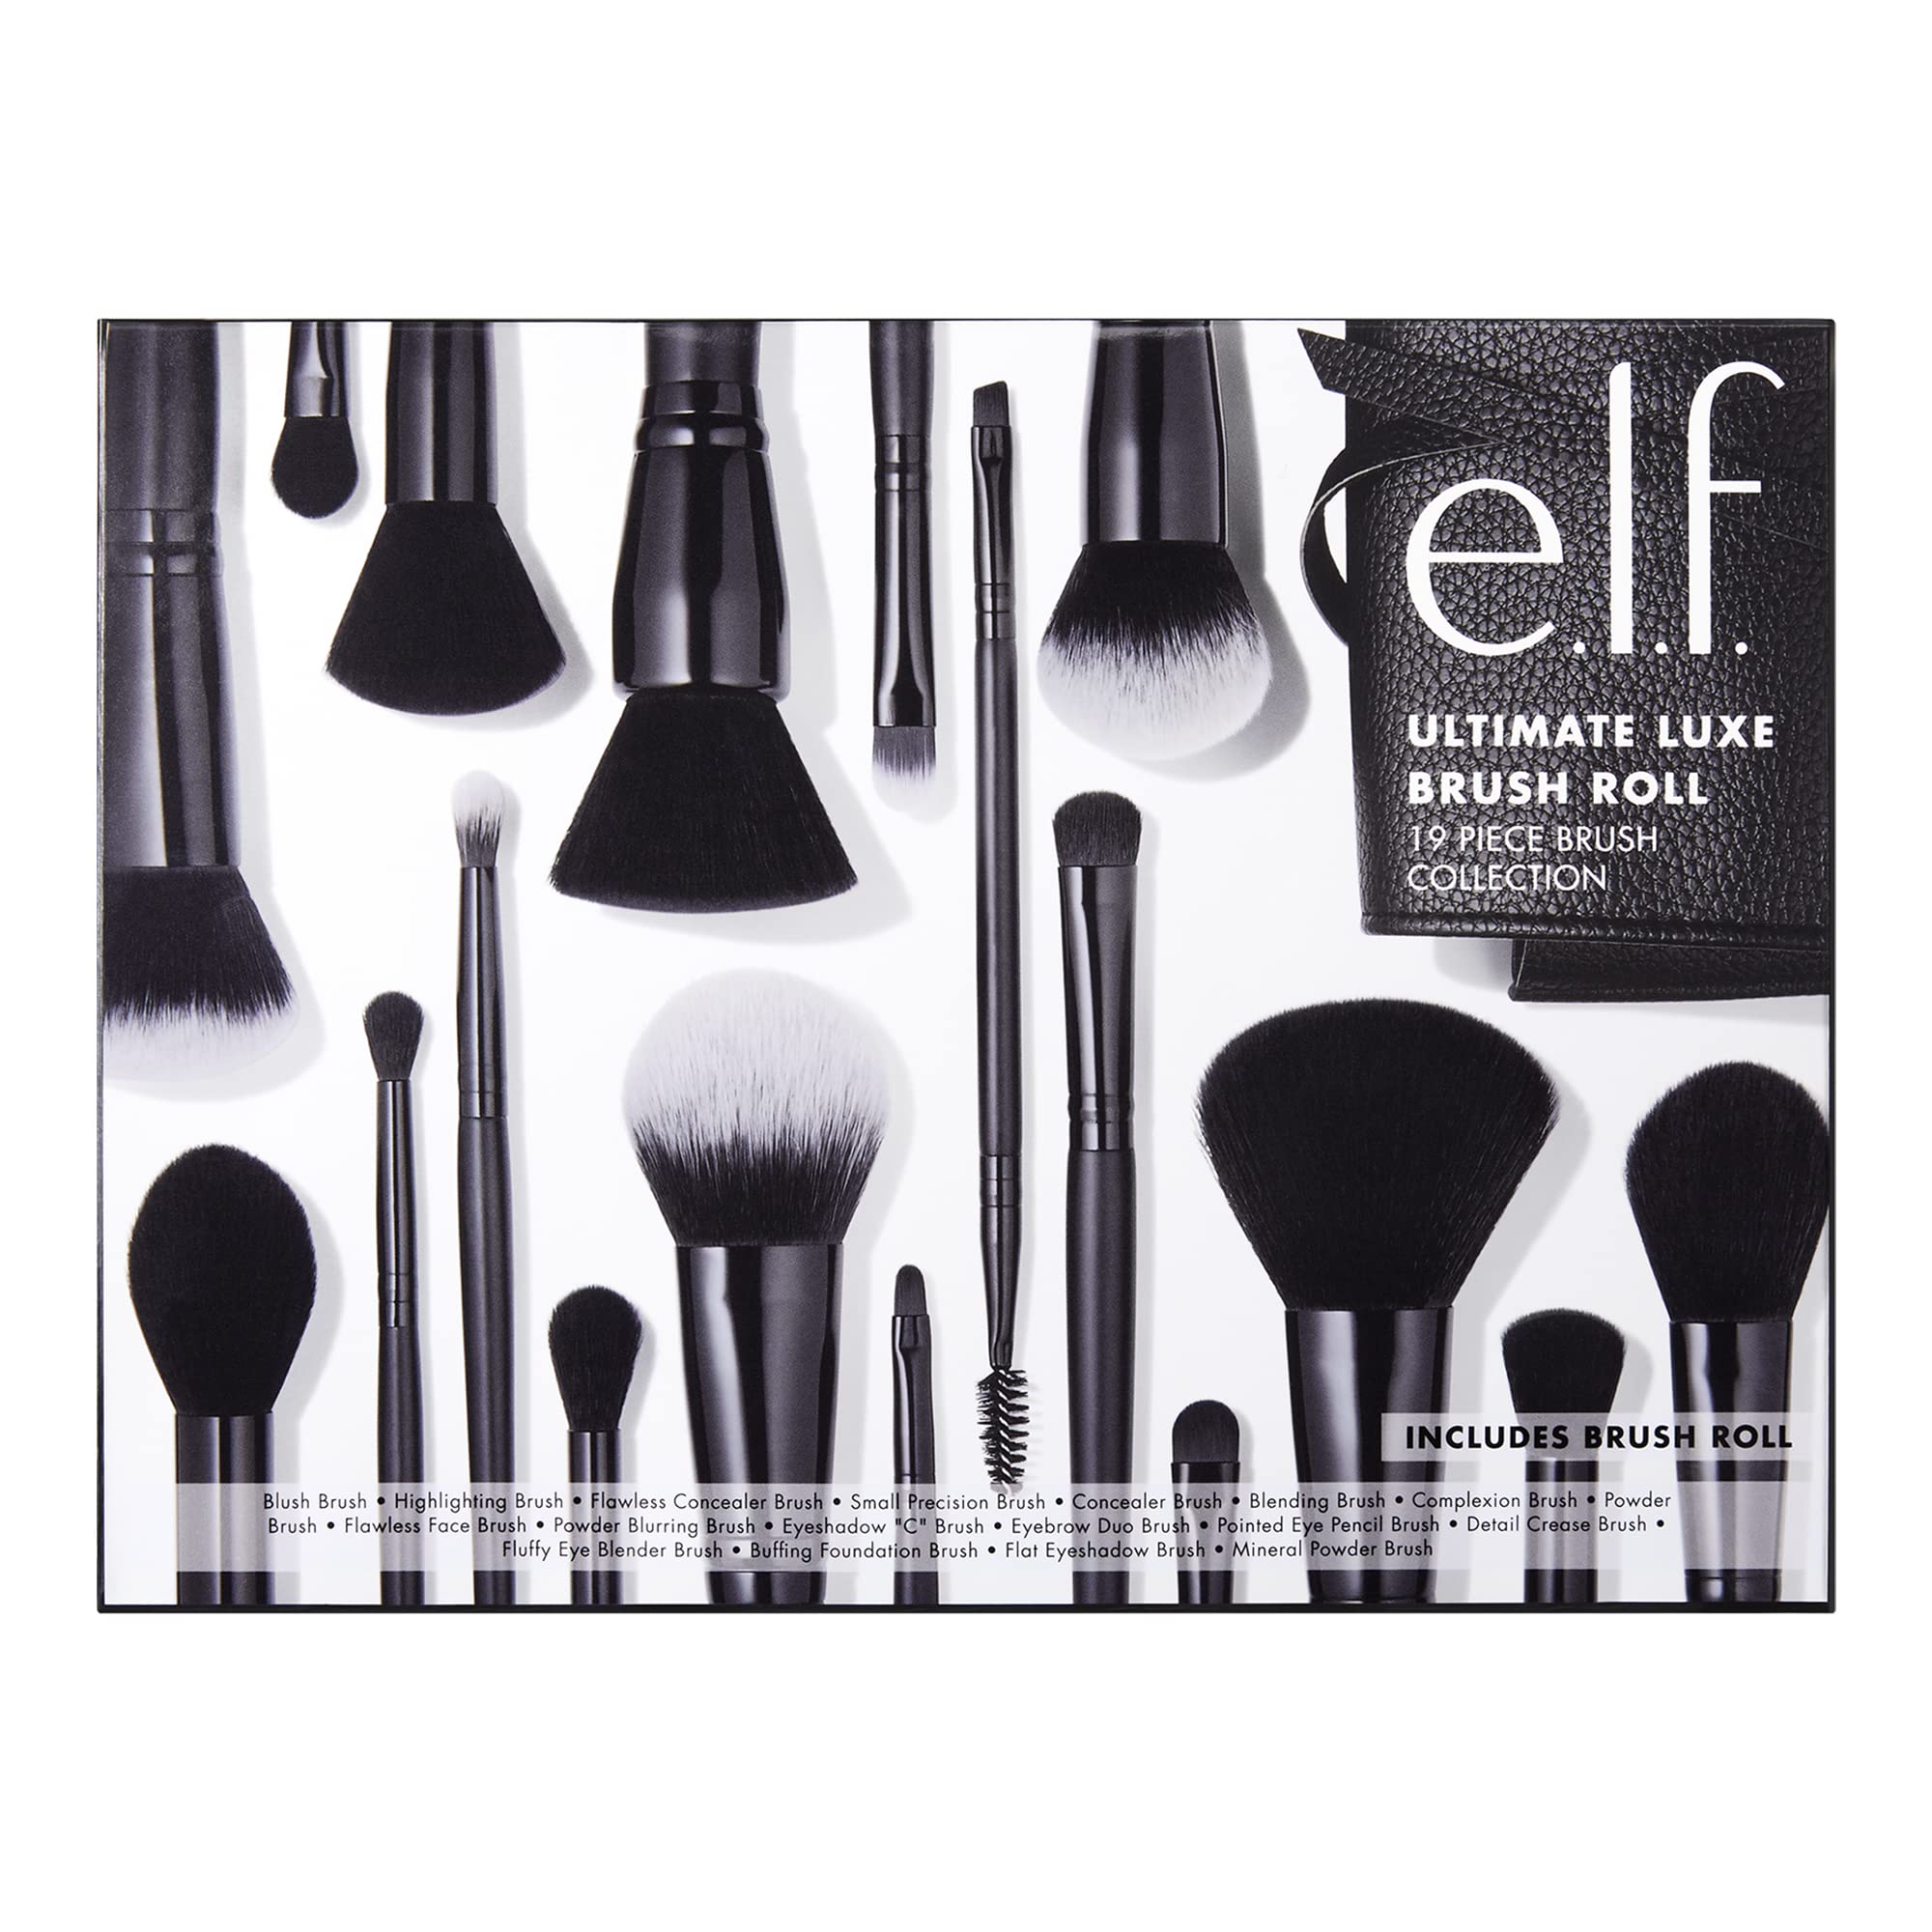 e.l.f. 19-Piece Makeup Brush Set & Roll, 19 Makeup Brushes For All Your Needs From Foundation To Eyeshadow, Made With Synthetic, Cruelty-free Bristles